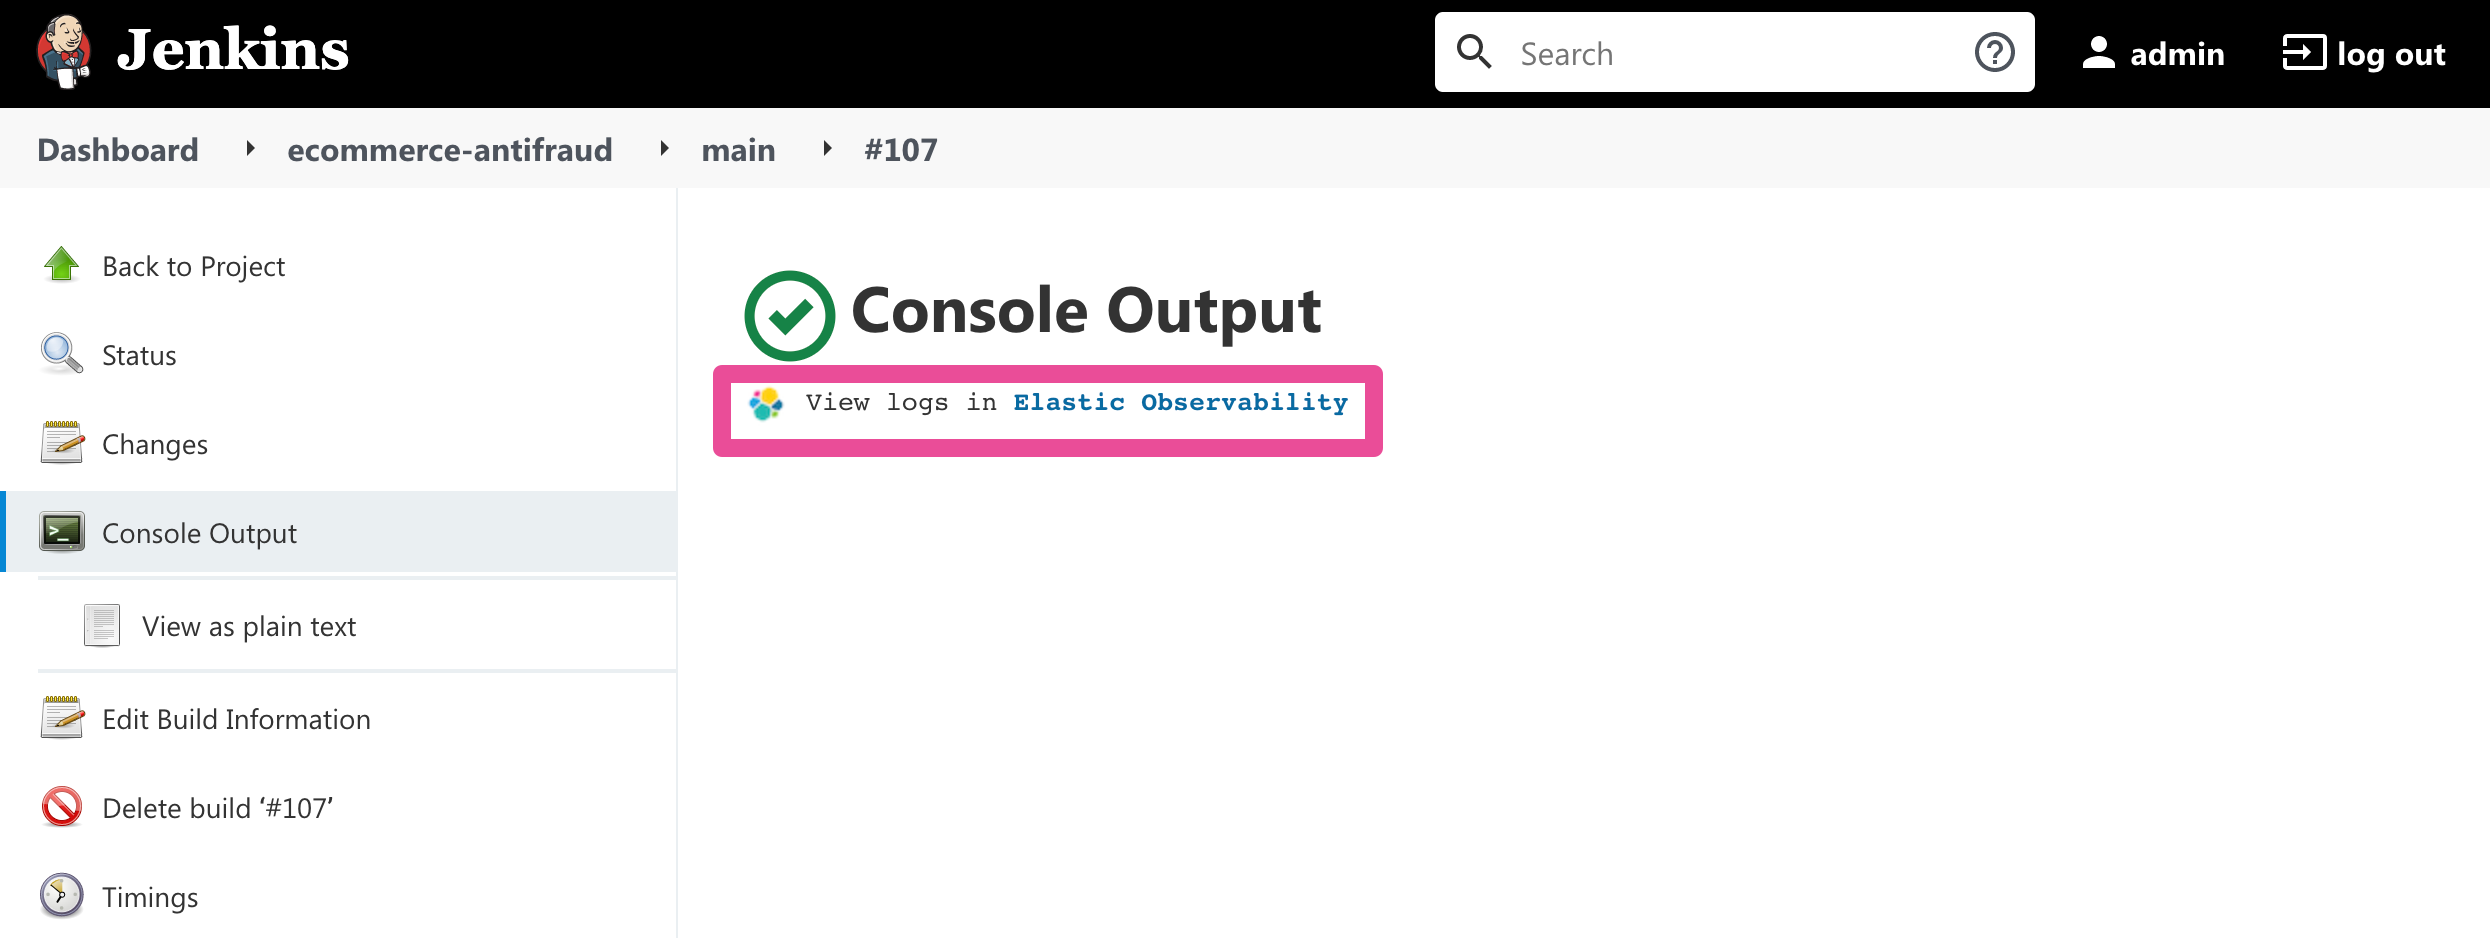 Jenkins Console Output page with link to view logs in Elastic Observability